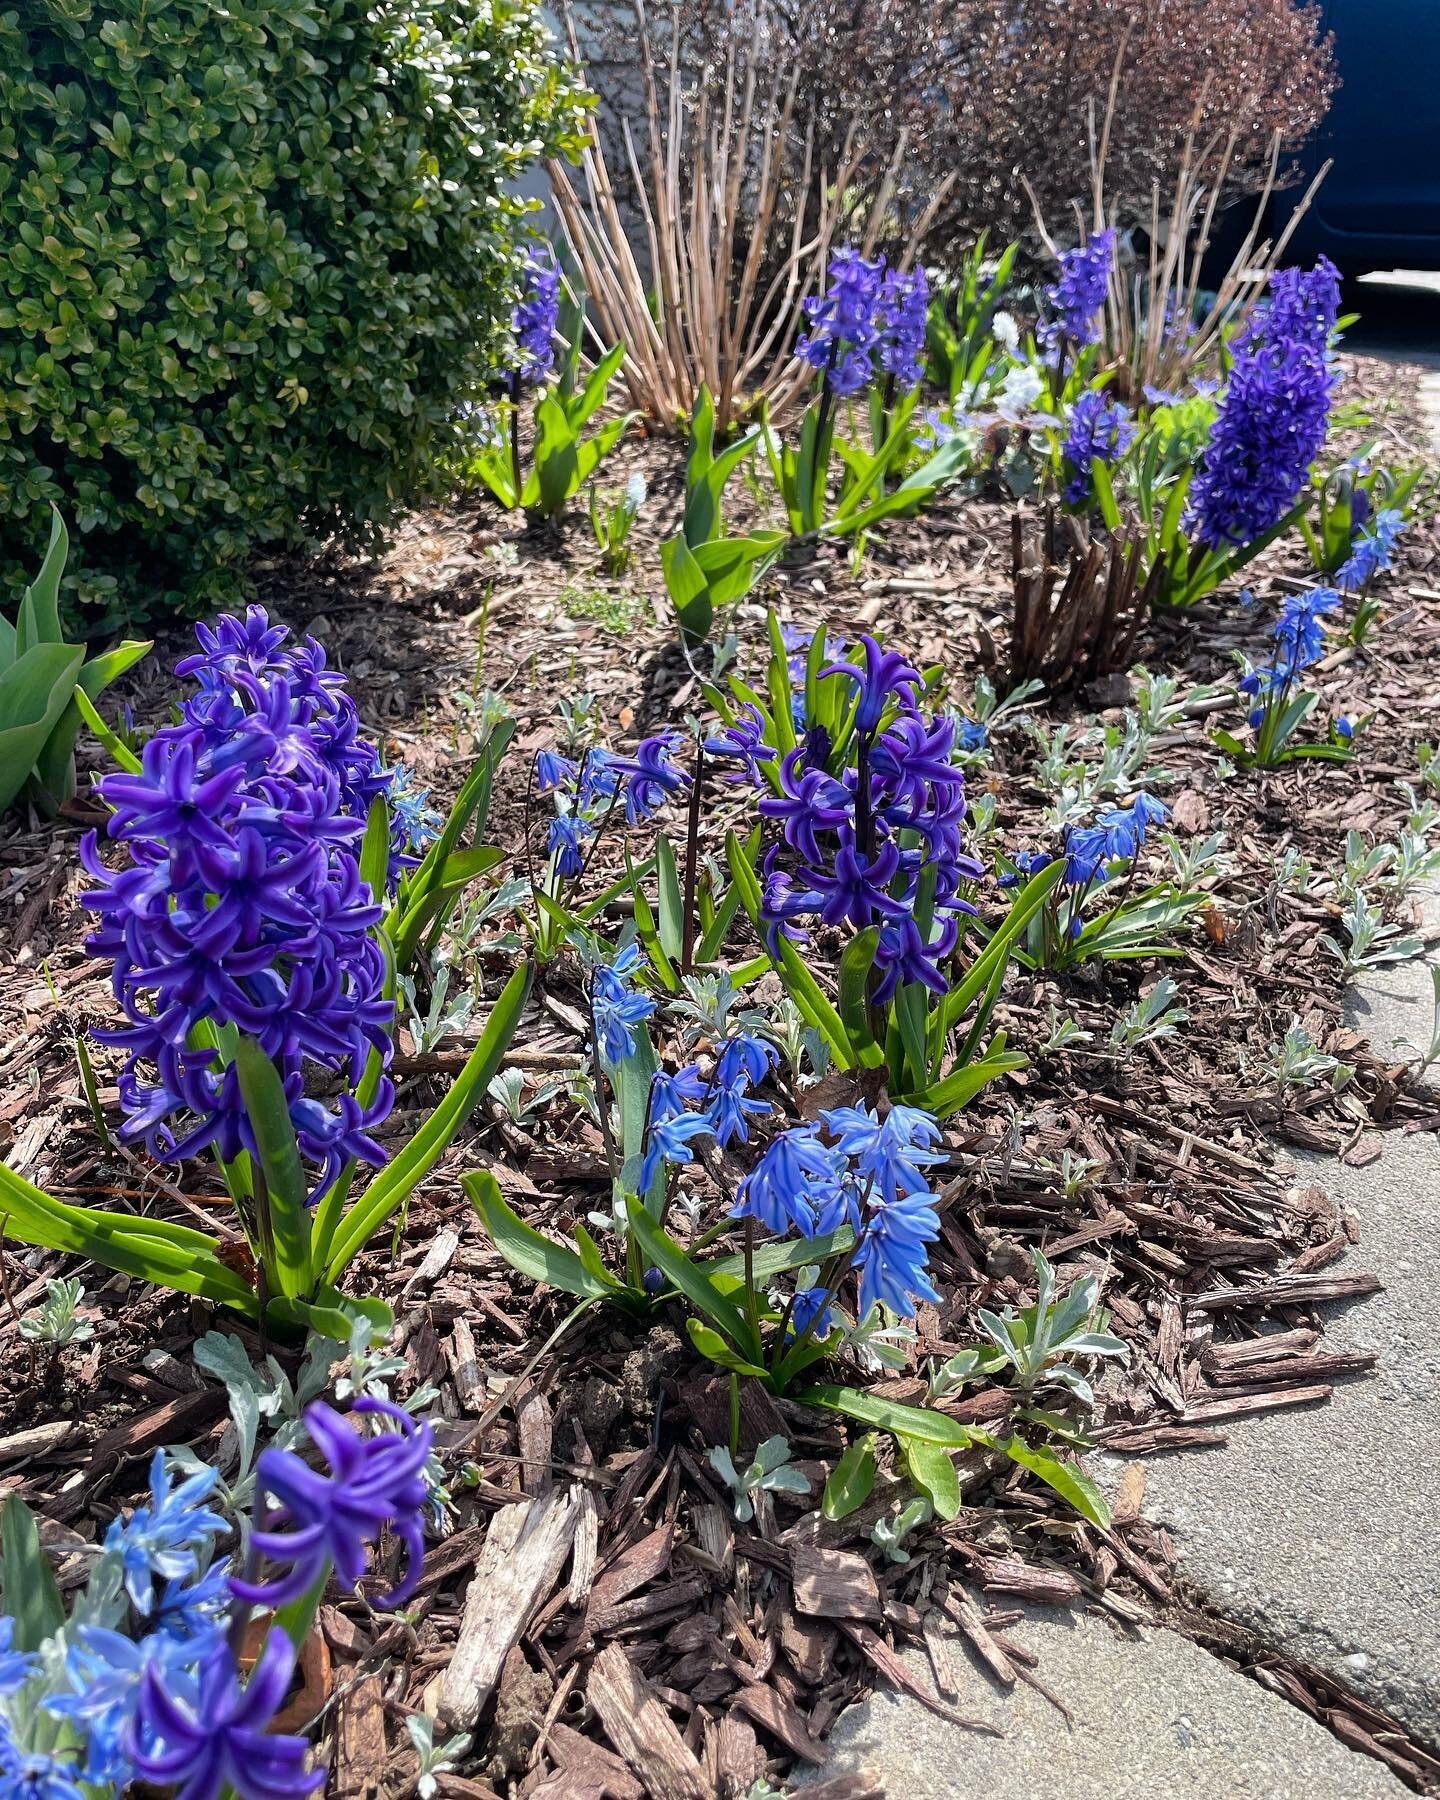 The garden is waking up 🥰 #hyacinth #scilla